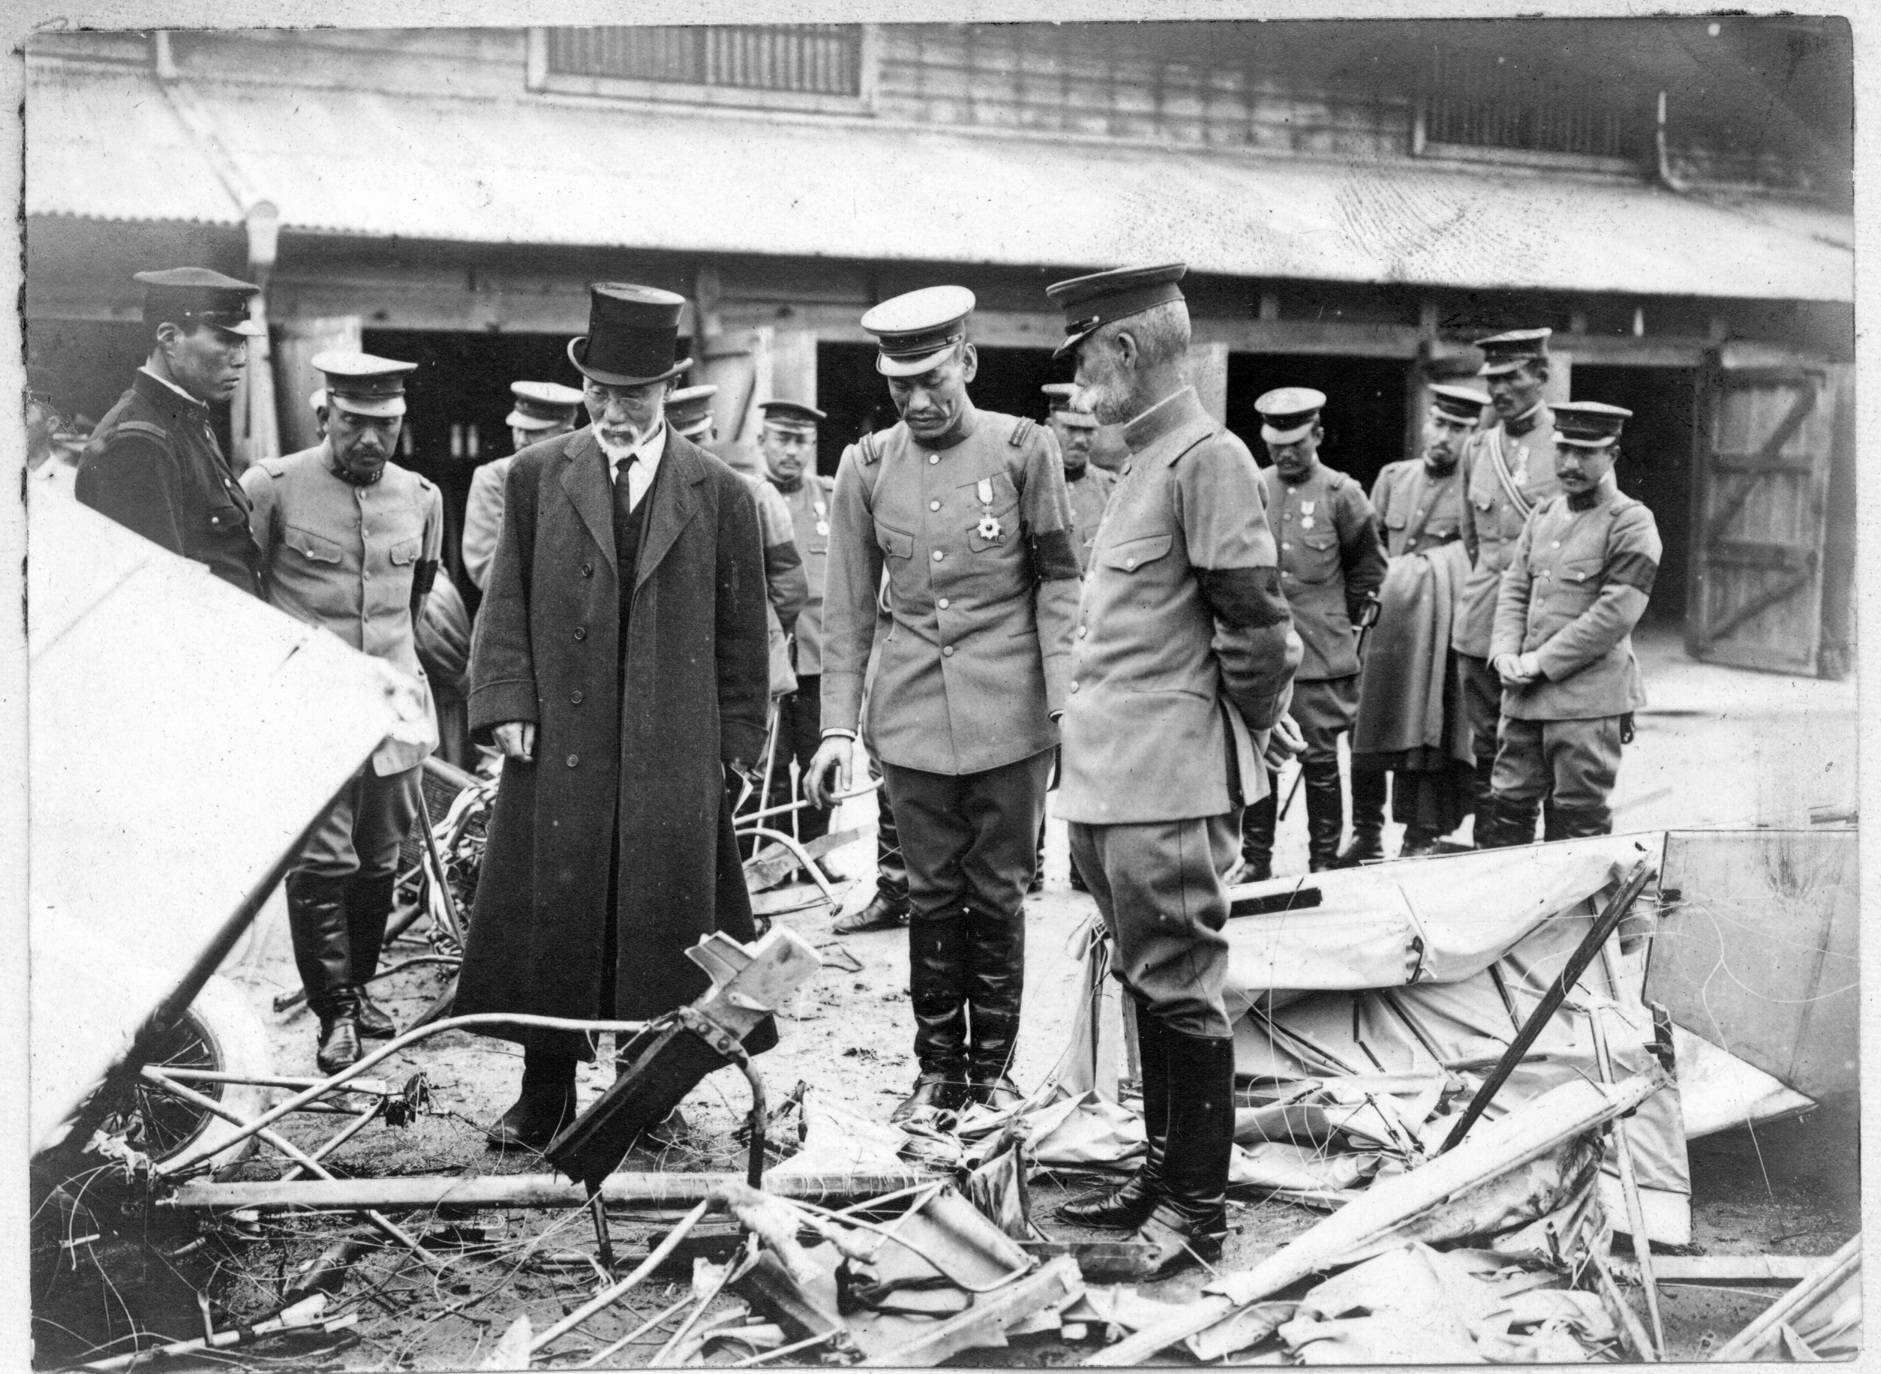 Aikitsu Tanakadate (left) became actively involved in military aviation ahead of World War II, and is seen here with military personnel at the site of an air crash in 1935. | COURTESY OF TANAKADATE AIKITU MEMORIAL SCIENCE MUSEUM